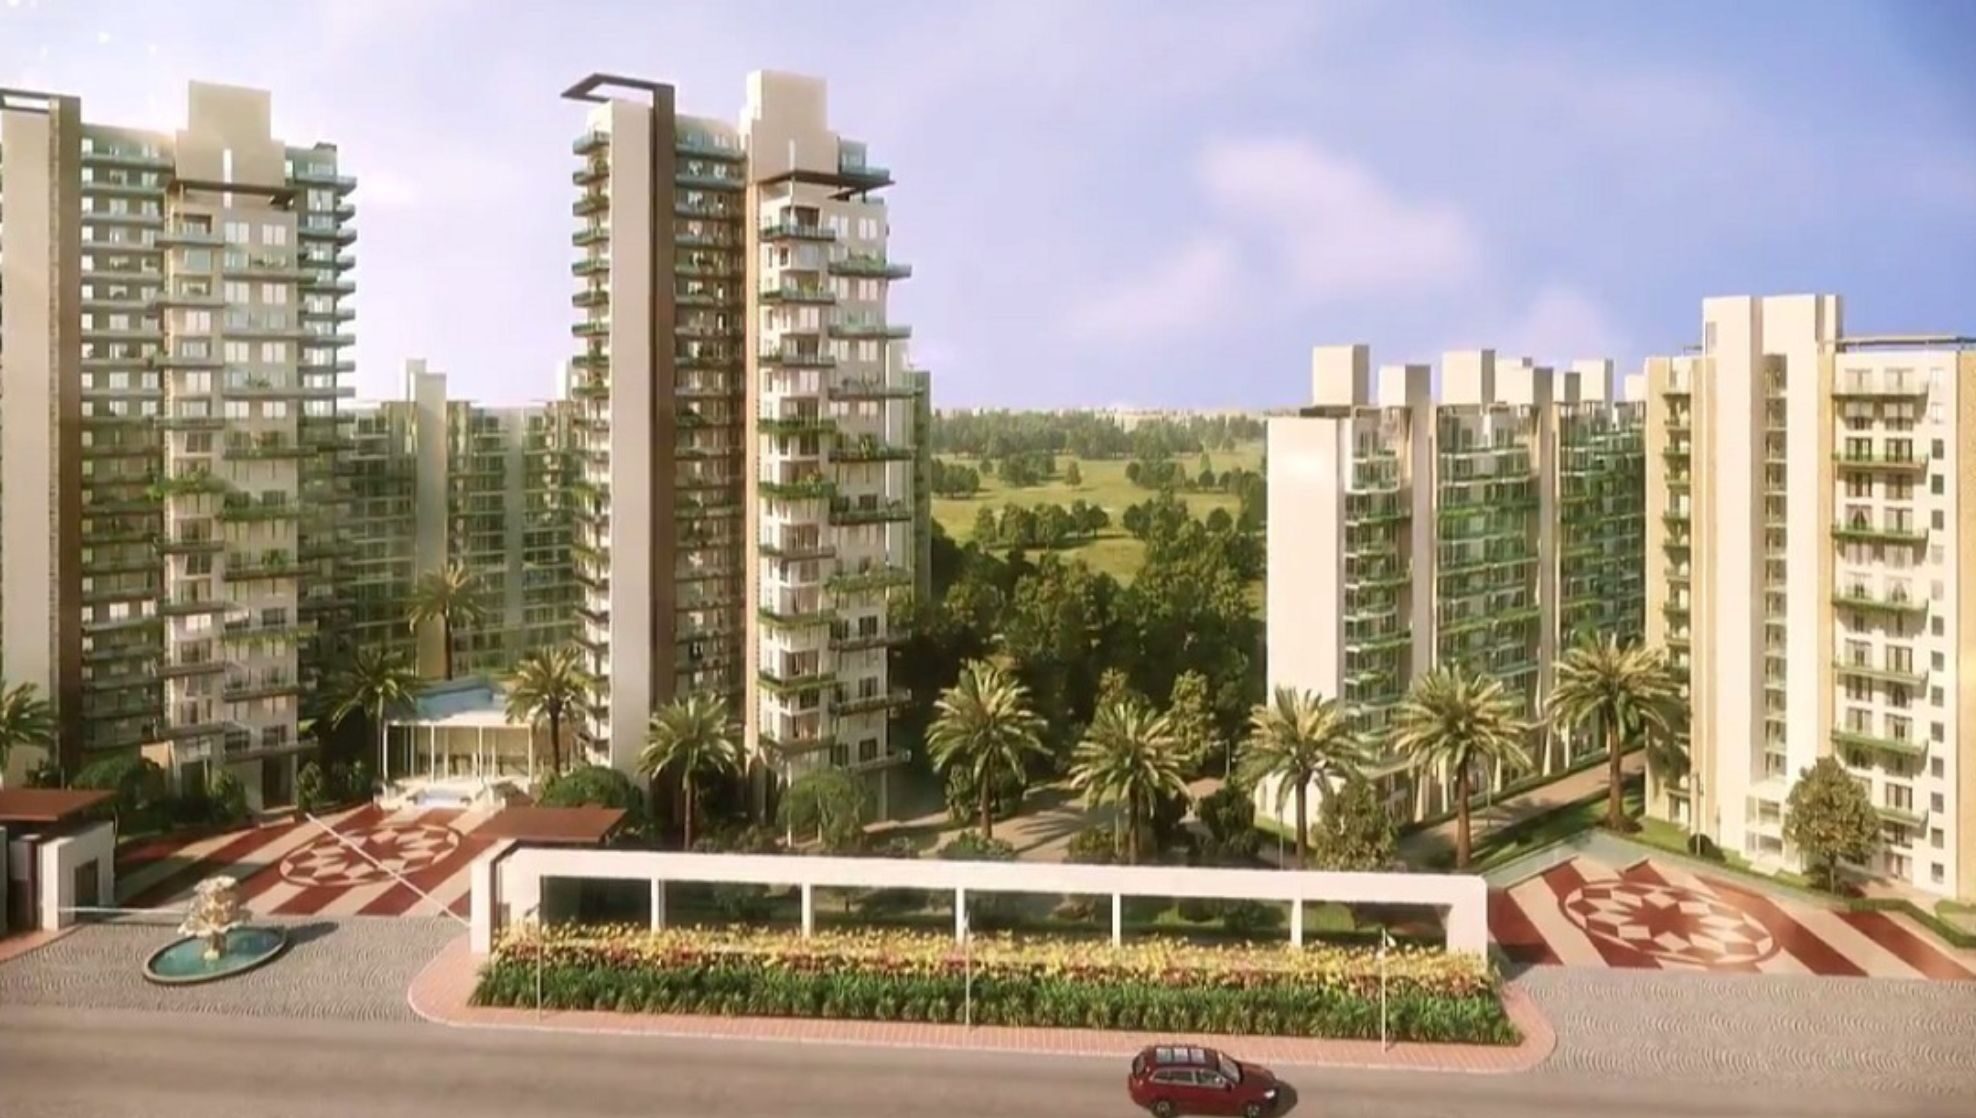 The image shows the luxury apartments in Gurgaon for rent.